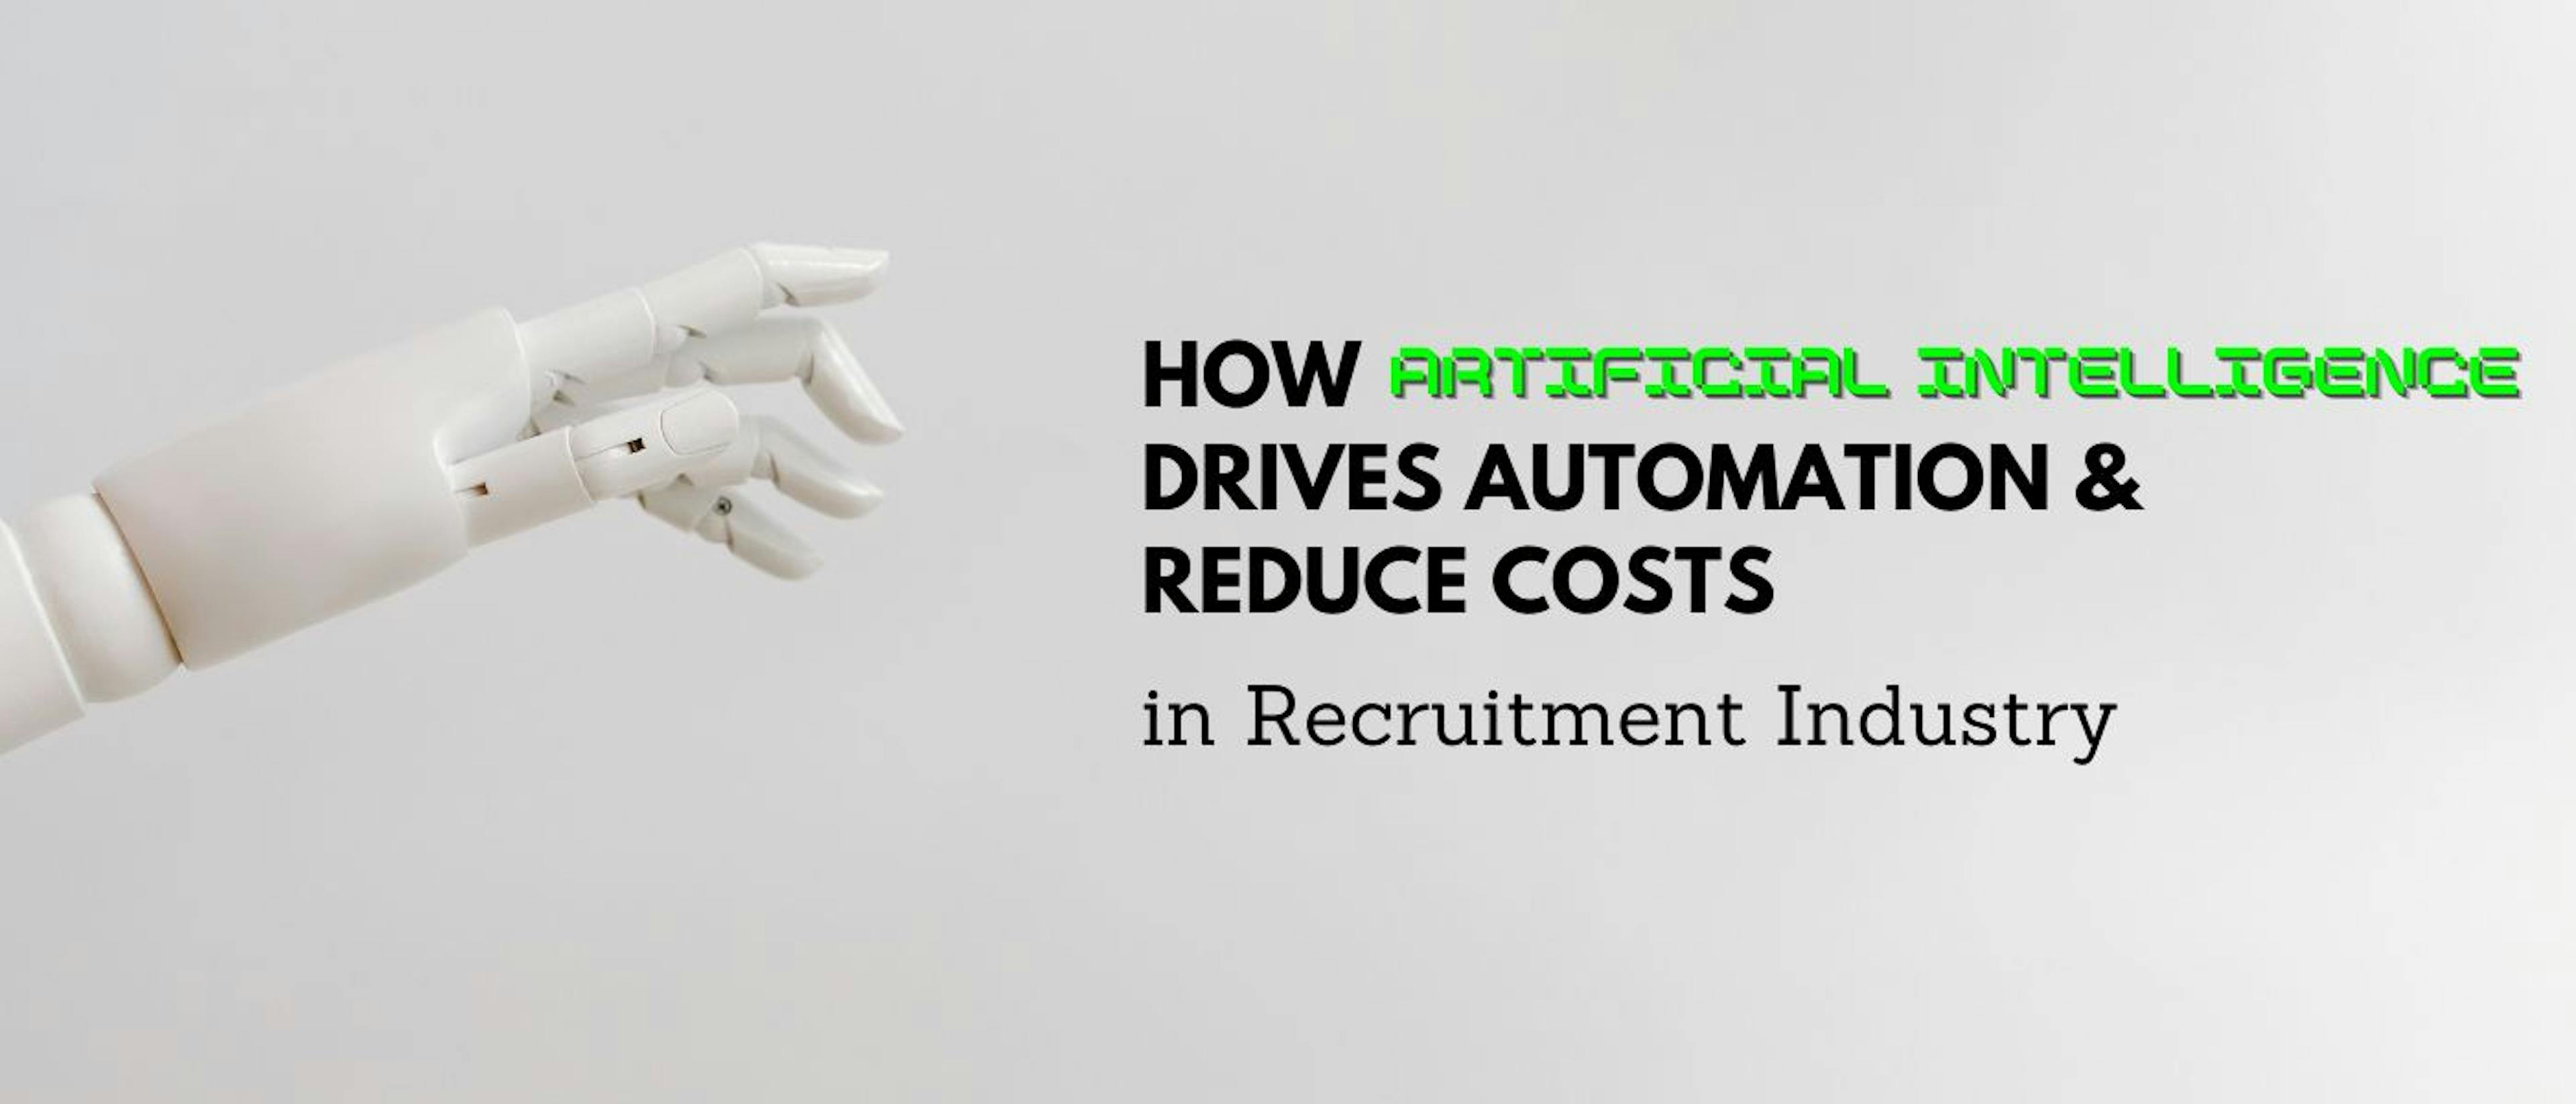 featured image - How Artificial Intelligence Drives Automation & Reduce Costs in Recruitment Industry 